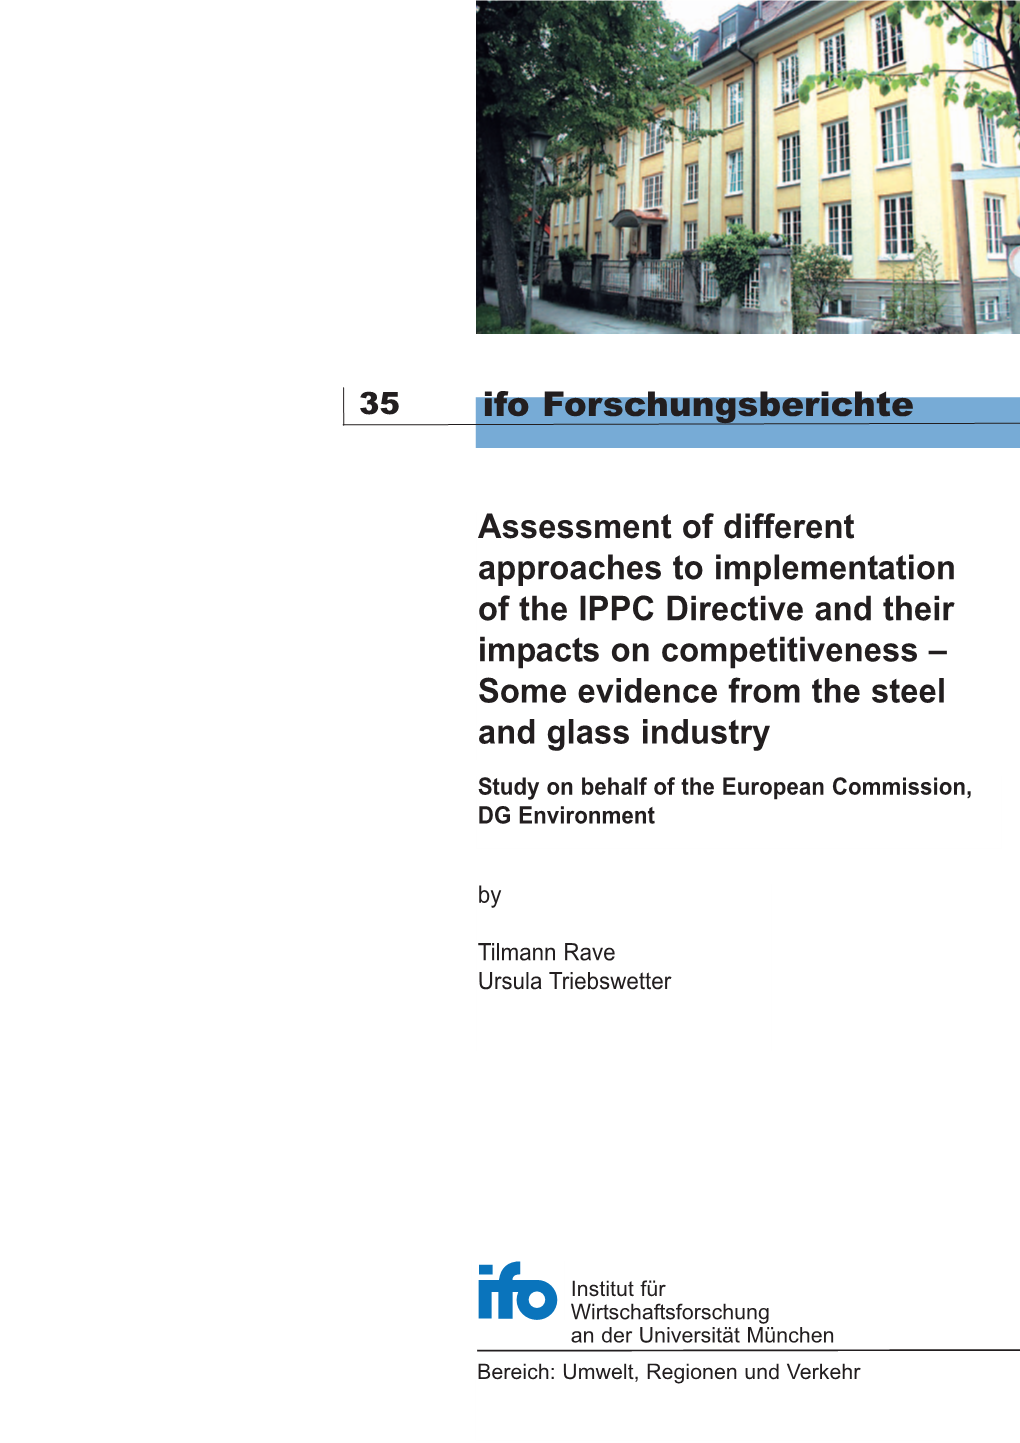 Assessment of Different Approaches to Implementation of the IPPC Directive and Their Impacts on Competitiveness – Some Evidence from the Steel and Glass Industry